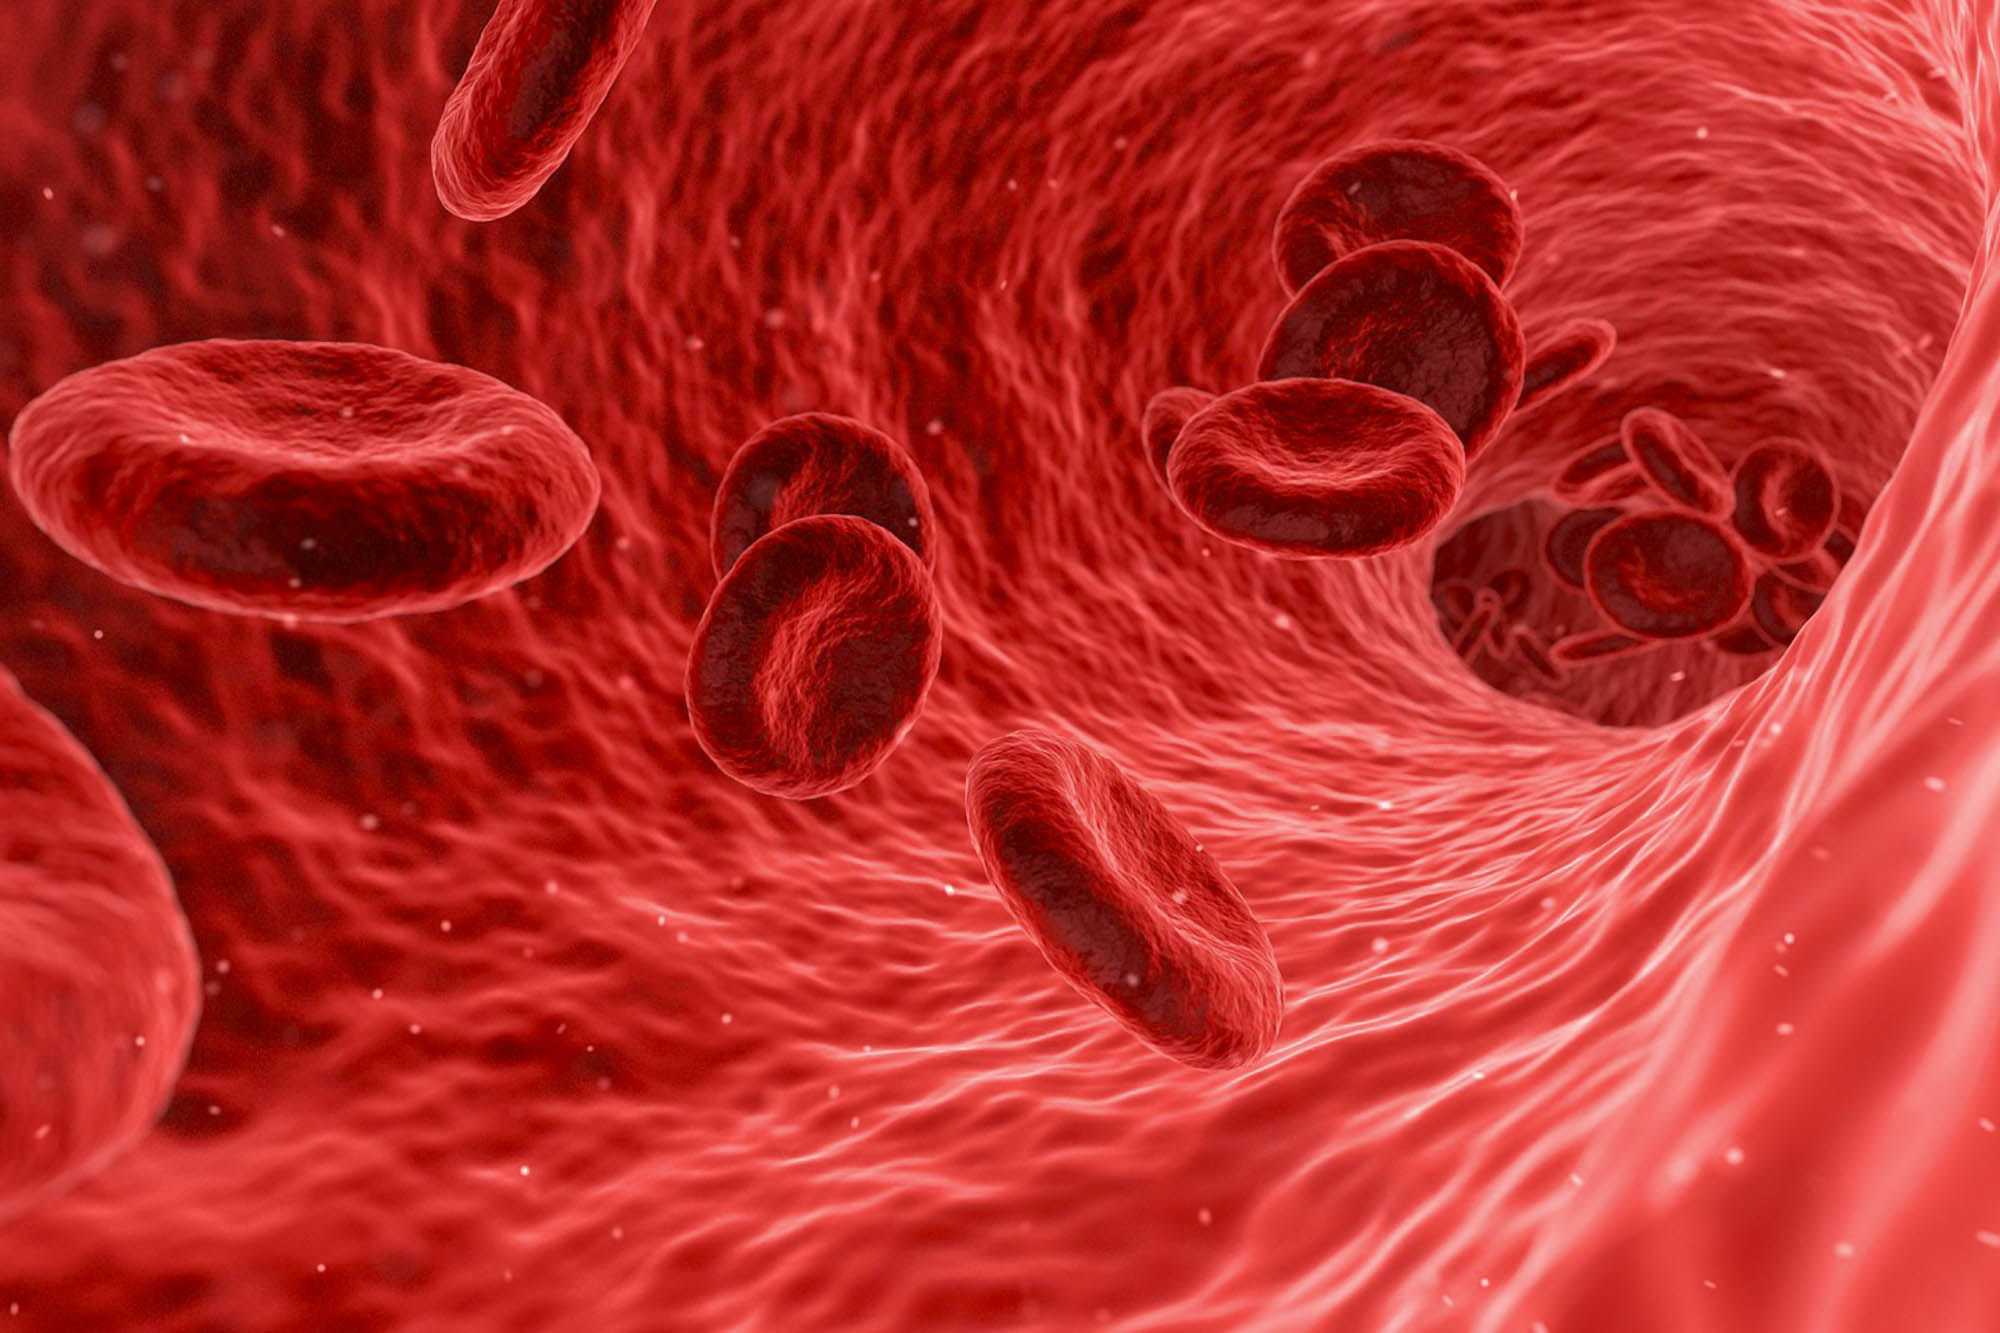 Red blood cells in a bloodstream